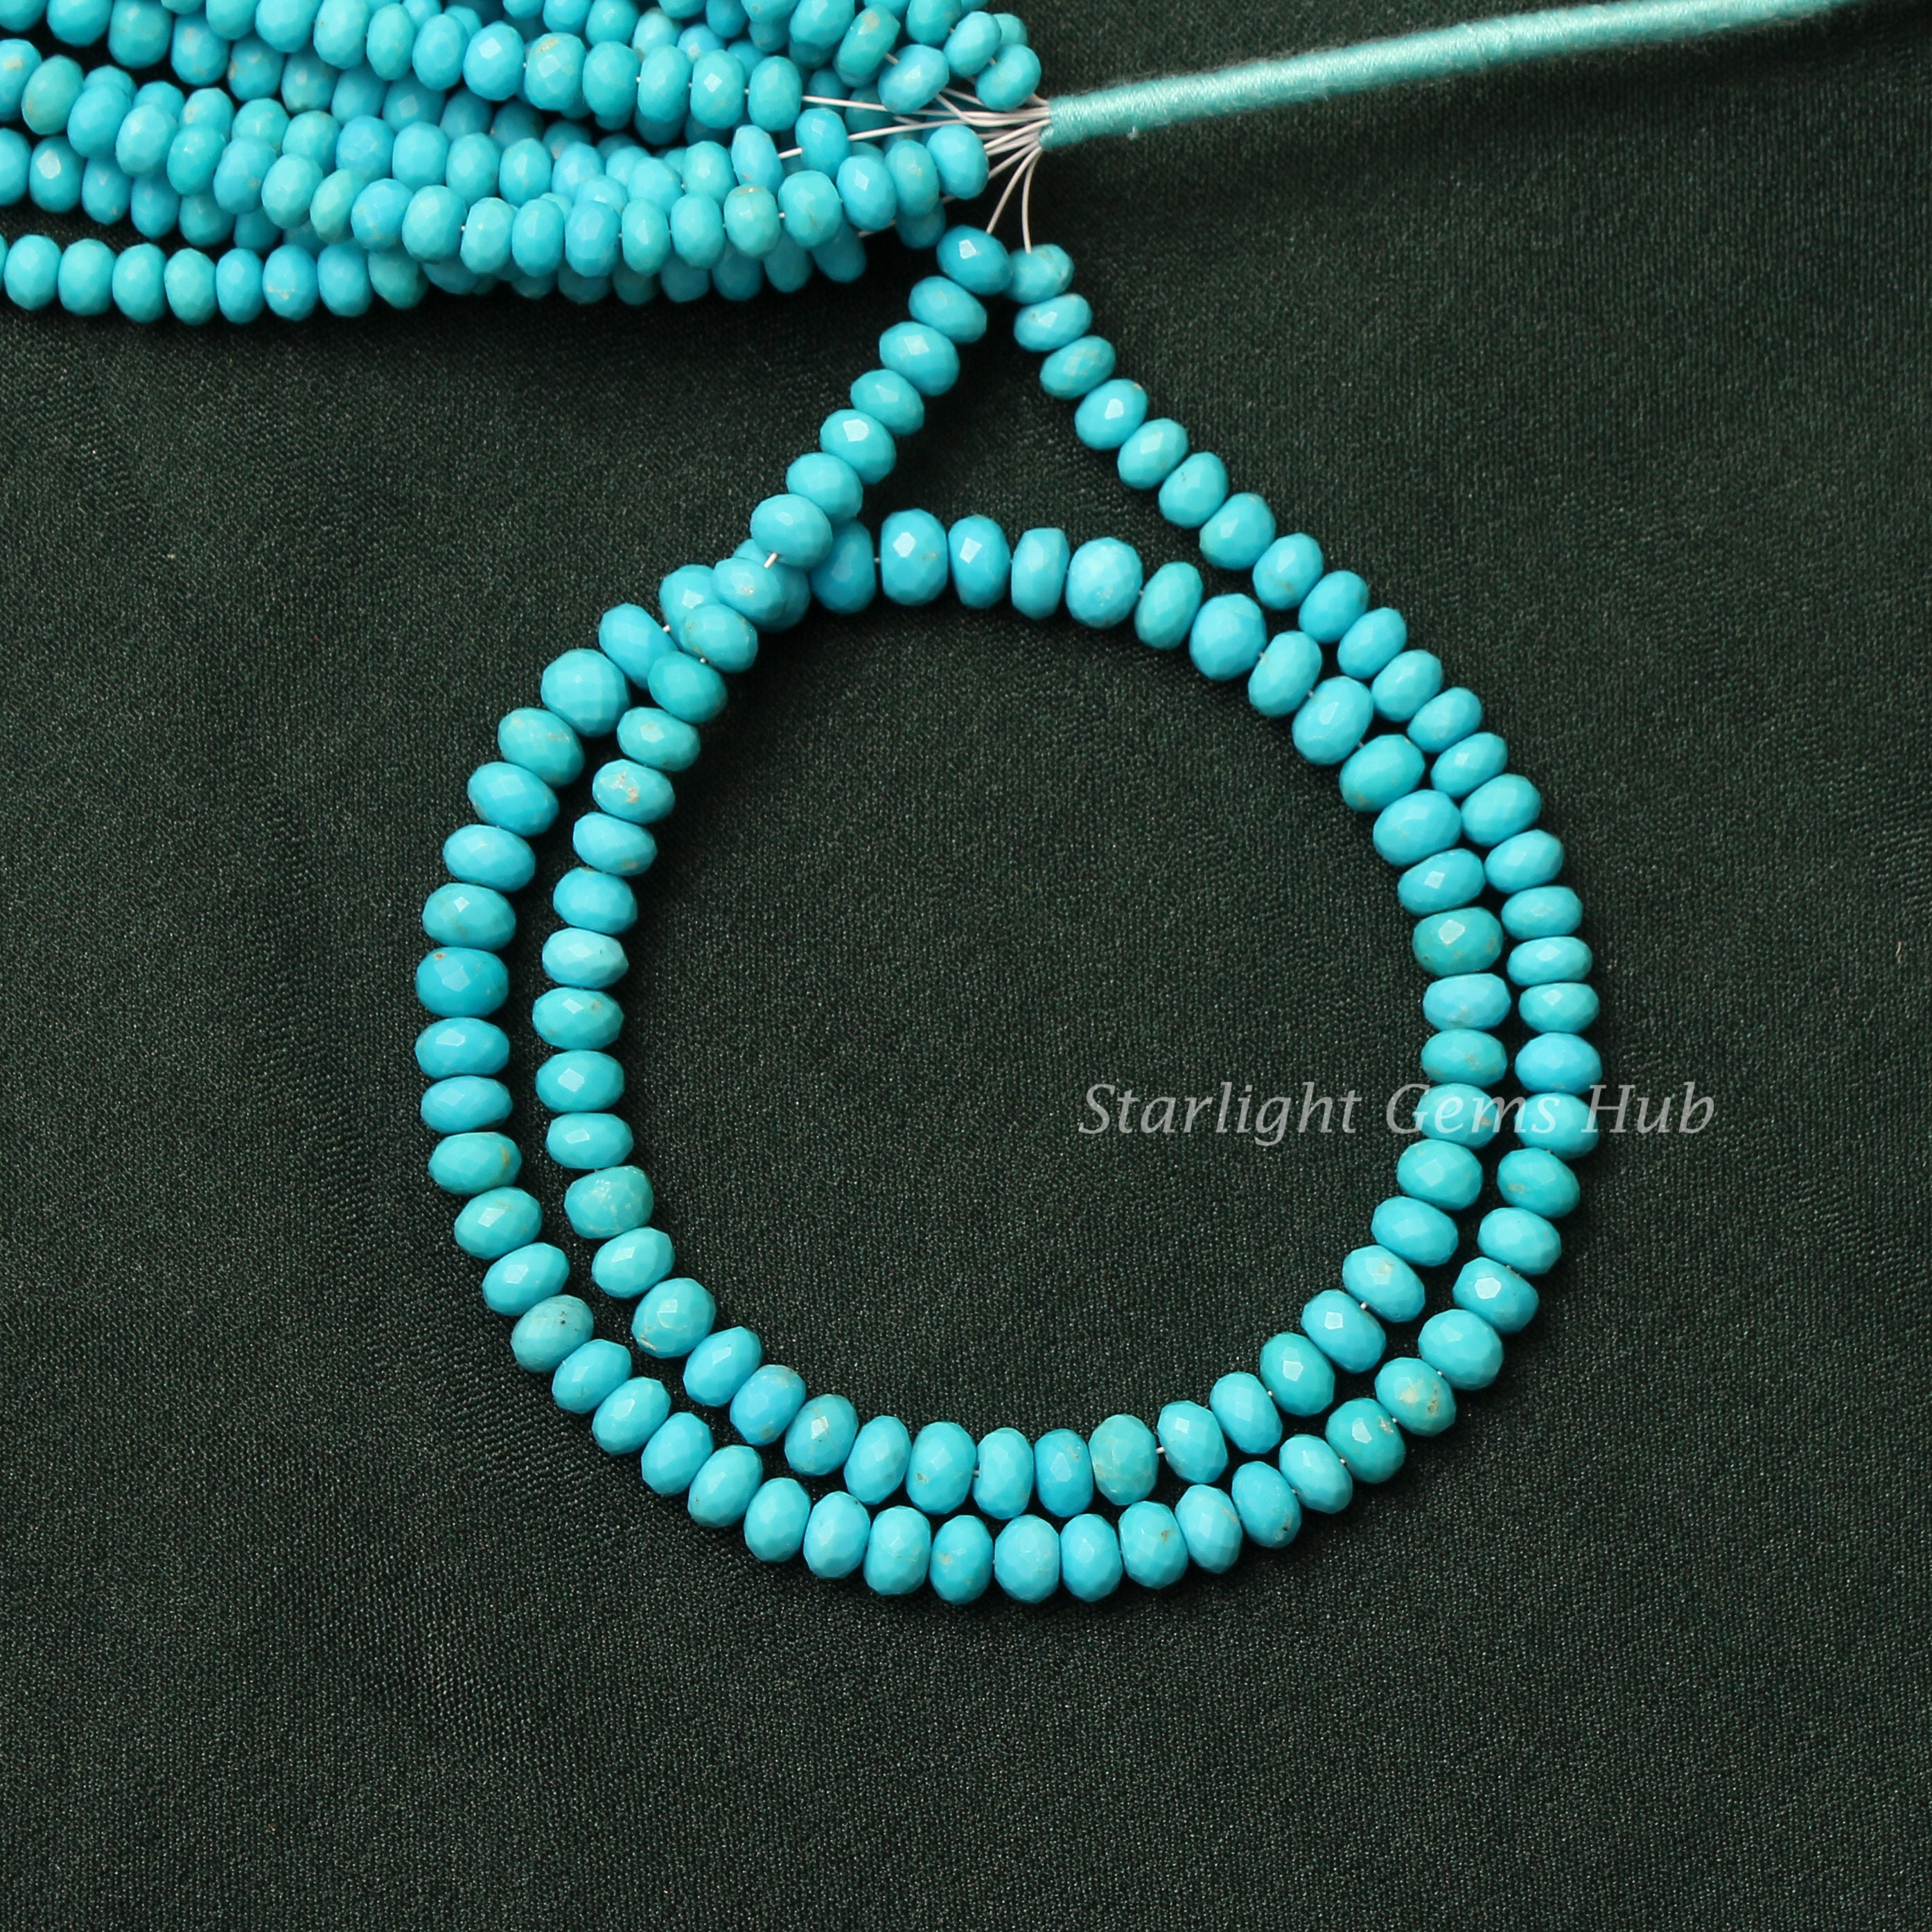 5mm Turquoise Beads Sleeping Beauty Blue Round Loose 25g Package 37640